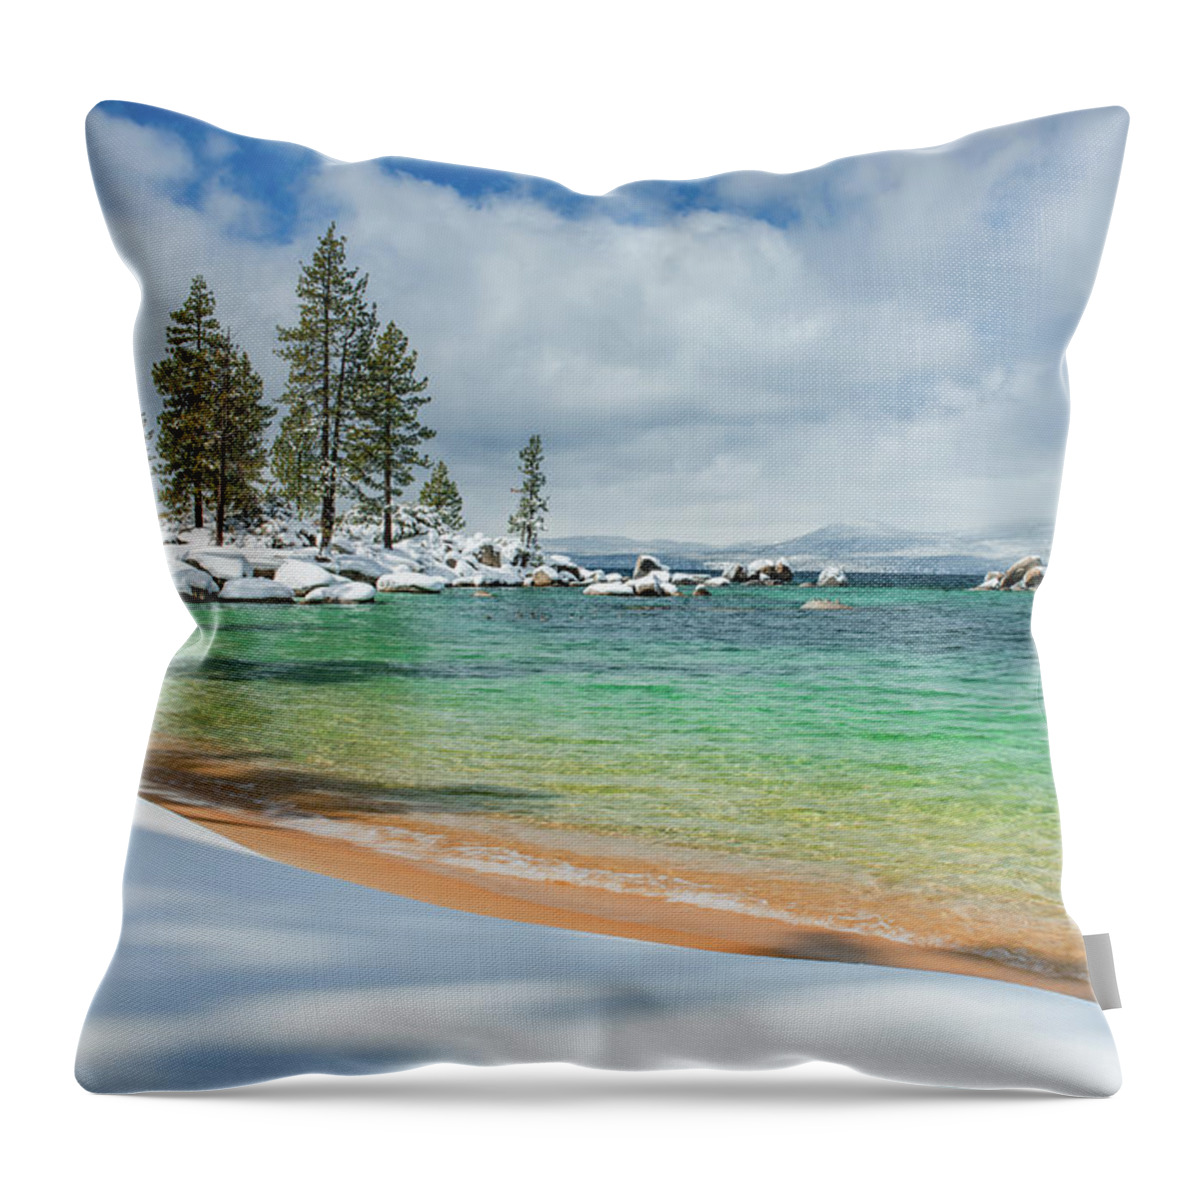 Sand Harbor Throw Pillow featuring the photograph Pristine Shores by Brad Scott by Brad Scott